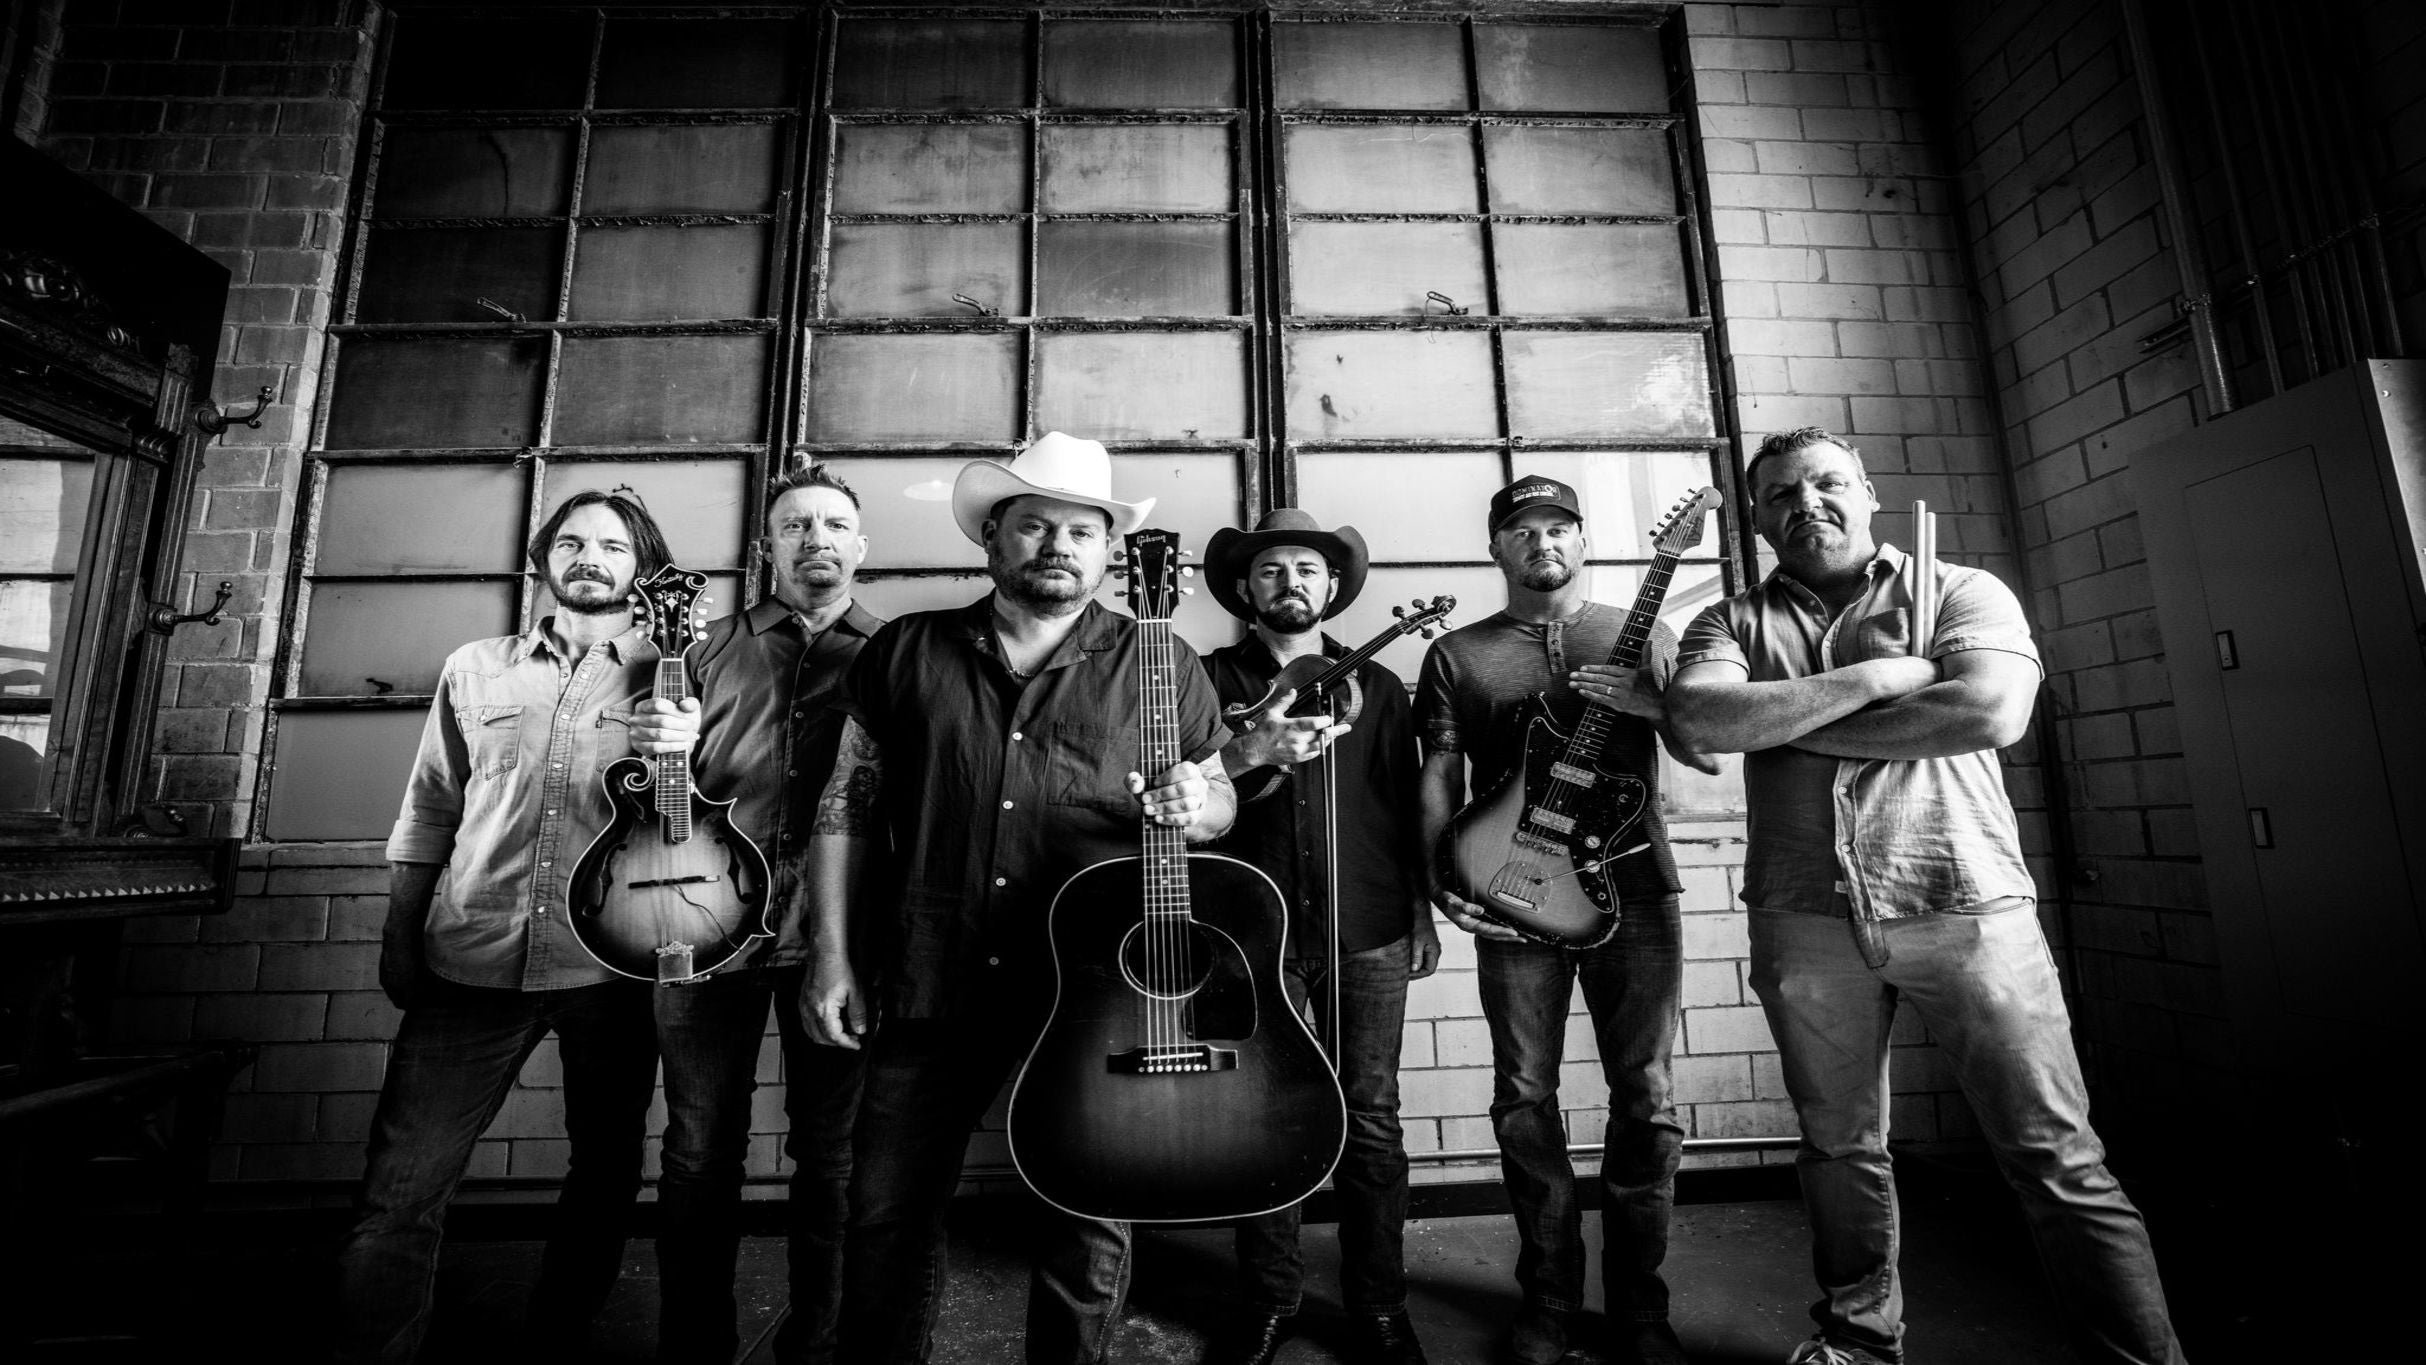 Randy Rogers Band in San Diego promo photo for Ticketmaster presale offer code